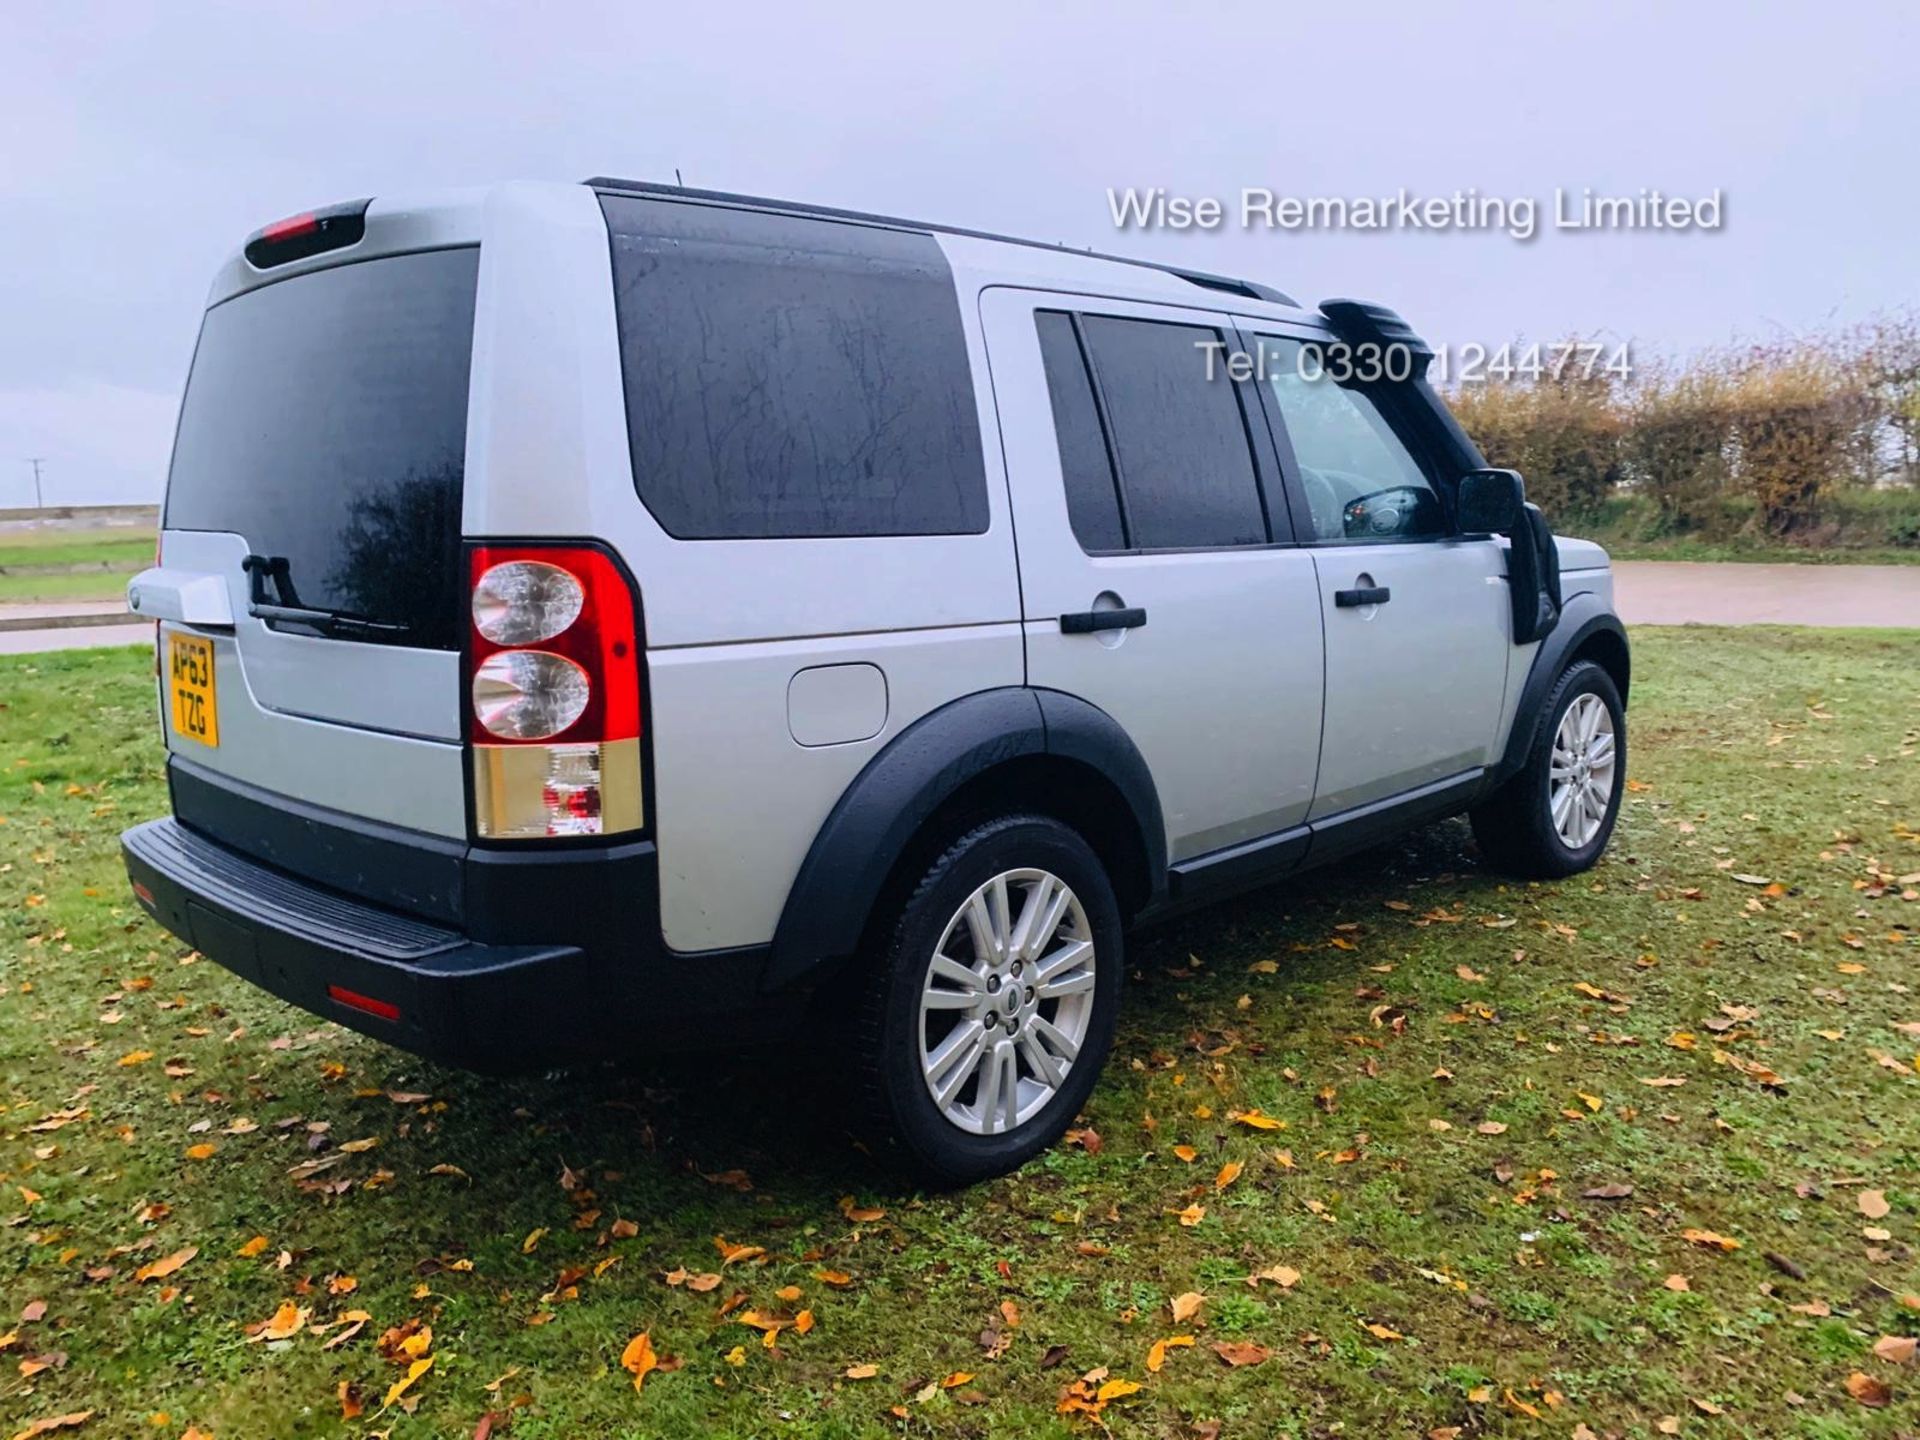 **RESERVE MET** Land Rover Discovery 3.0 SDV6 4x4 Utility Commercial - Auto - 1 Keeper - 2014 Model - Image 8 of 28